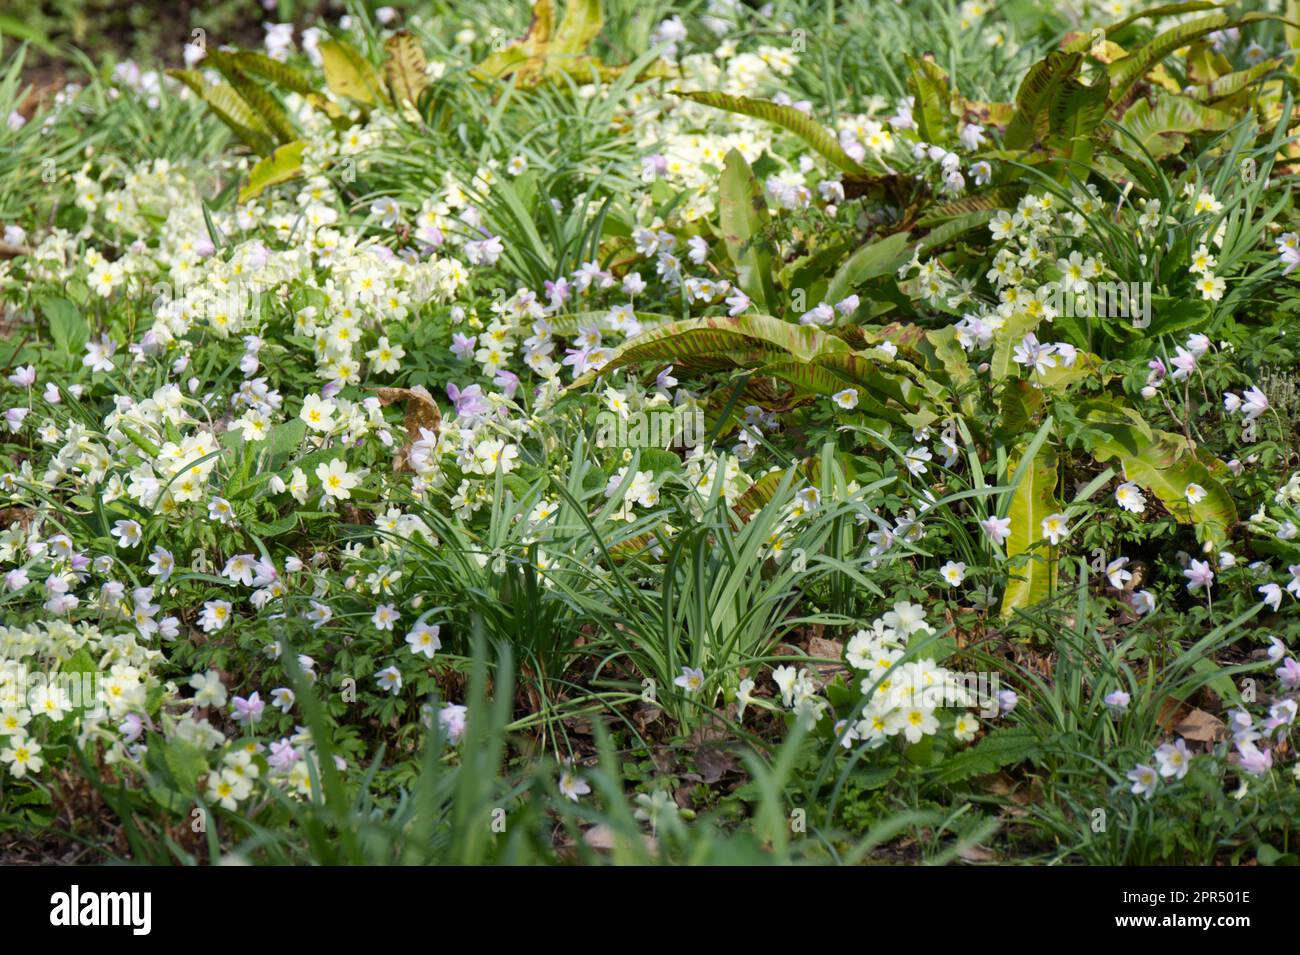 Pale yellow primroses Primula vulgaris and pink spring flowers of wood anemone nemorosa E.A. Bowles and hart's tongue fern in UK garden April Stock Photo